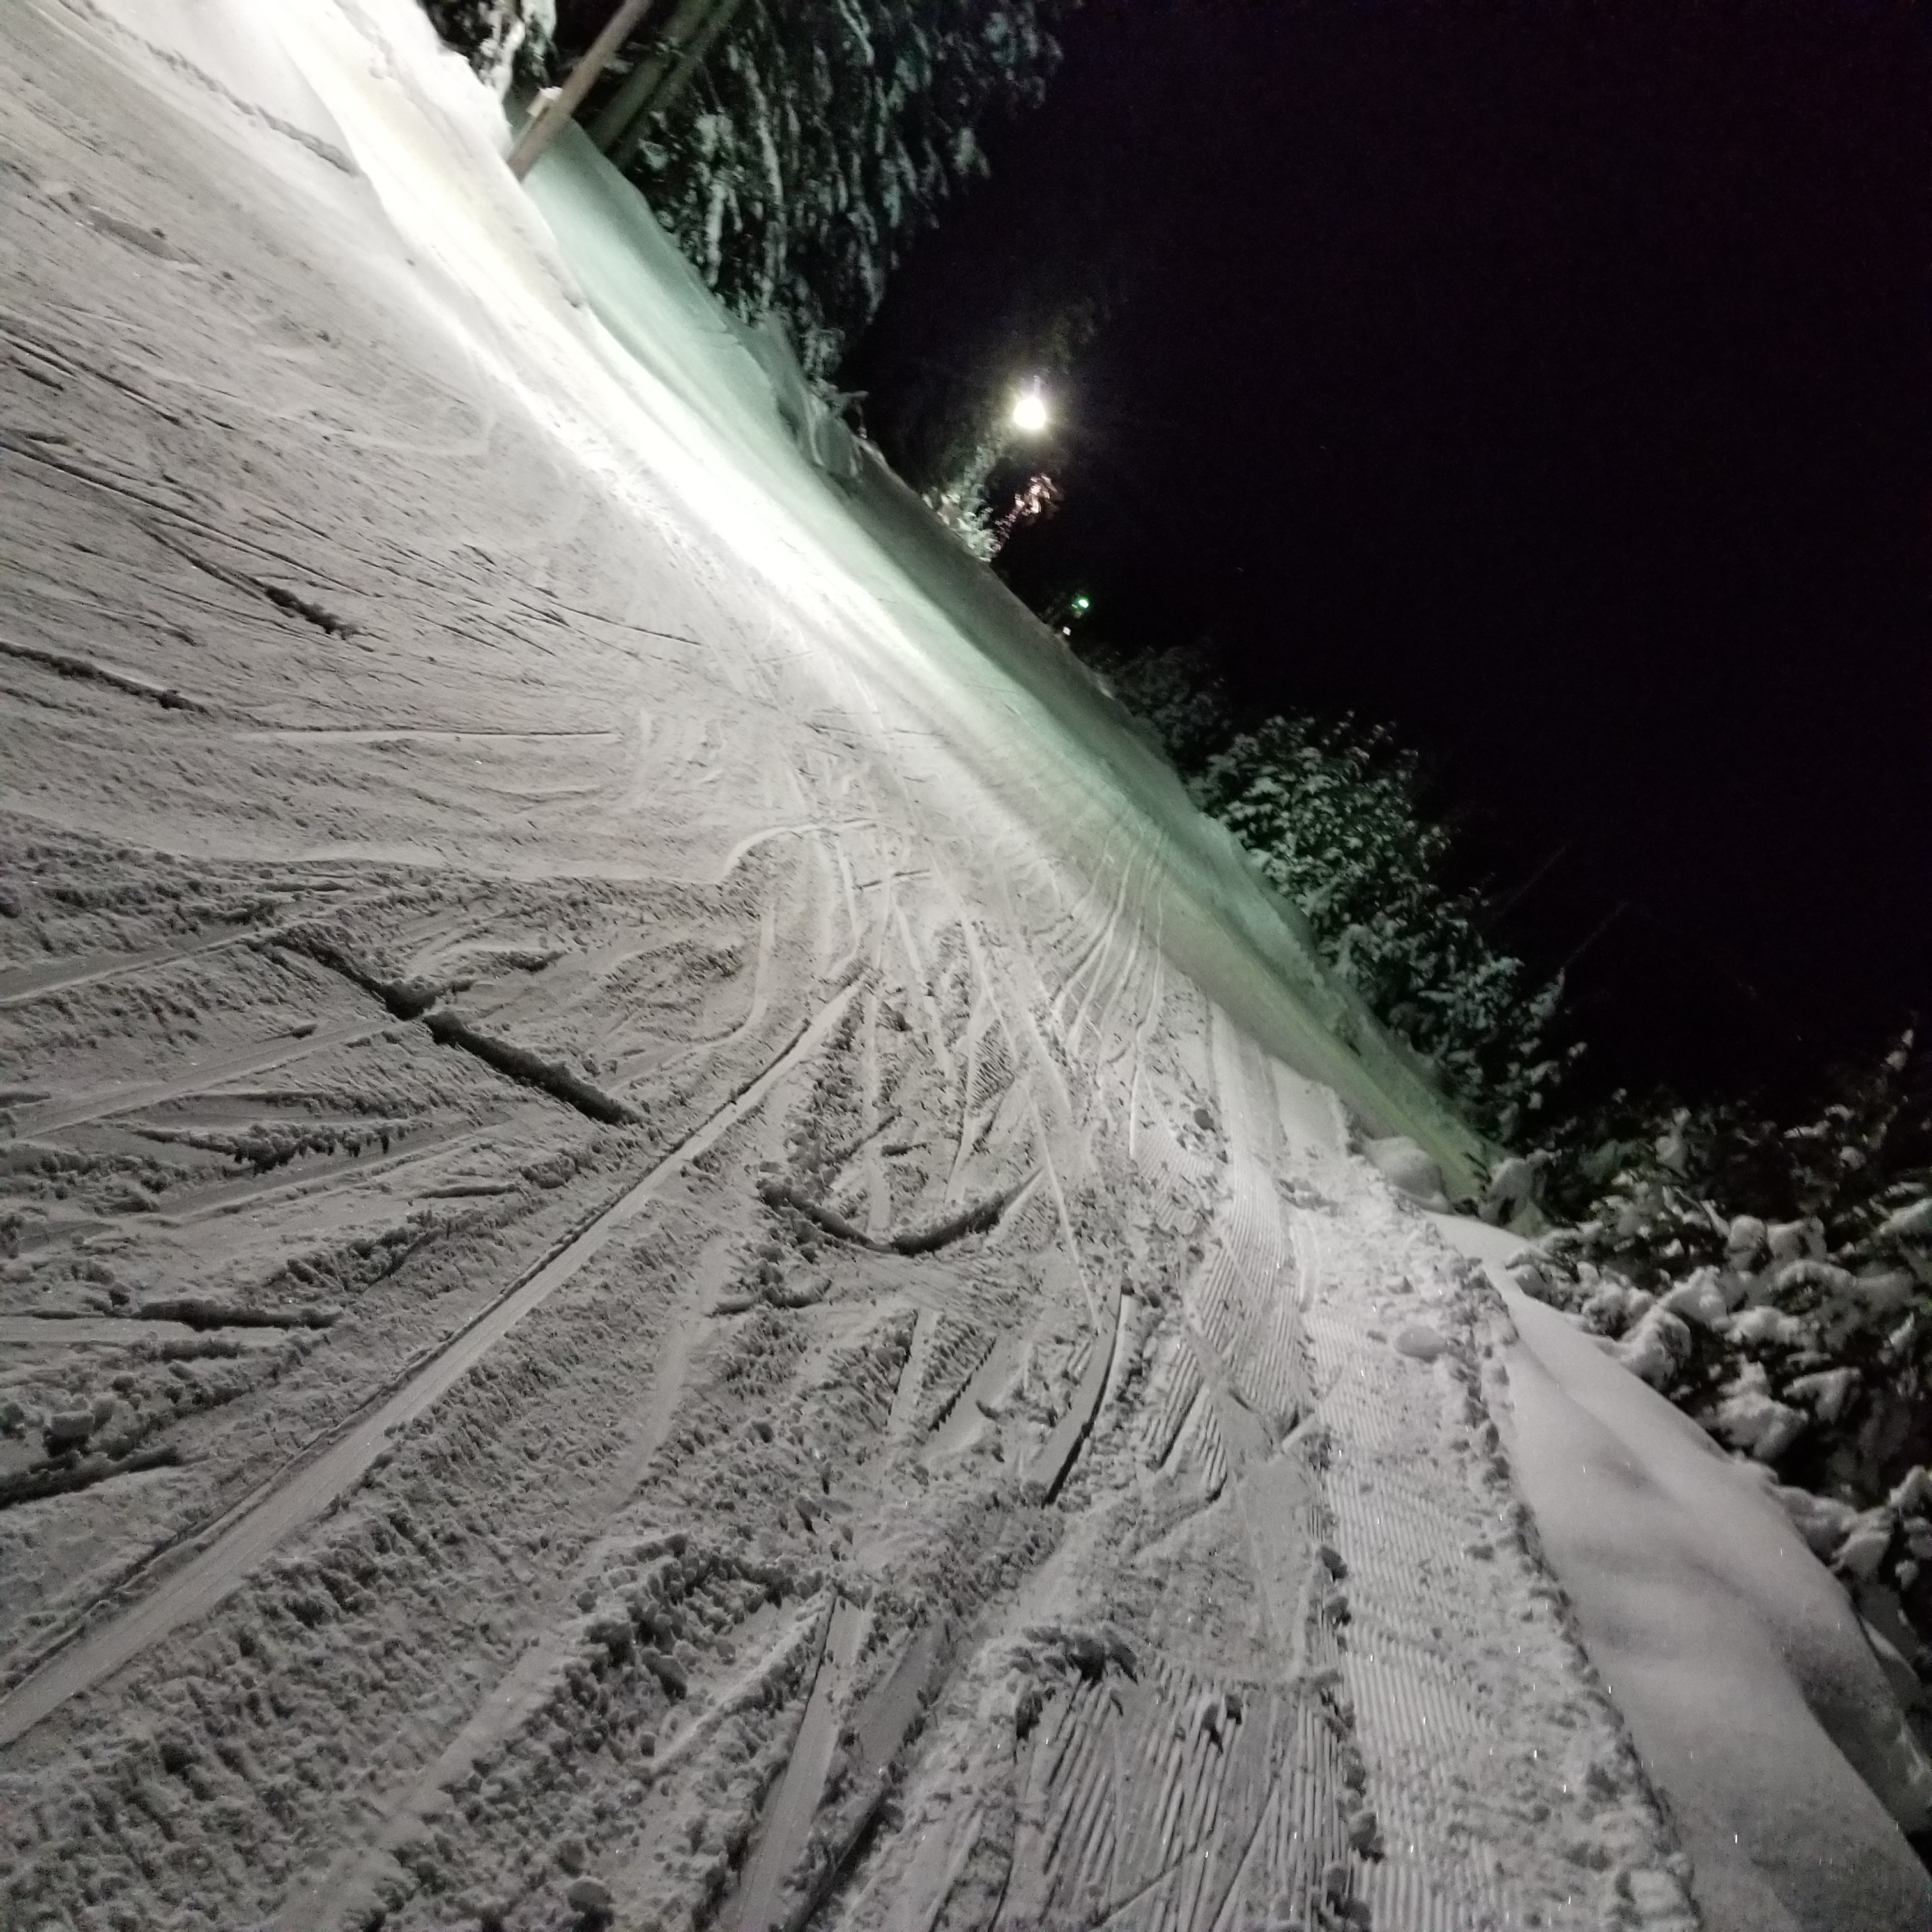 Yay lower powerline was perfect for skate and classic cross-country skiing @cypressmtn last night #endlesswinter #lucky 20171220_210203 photo